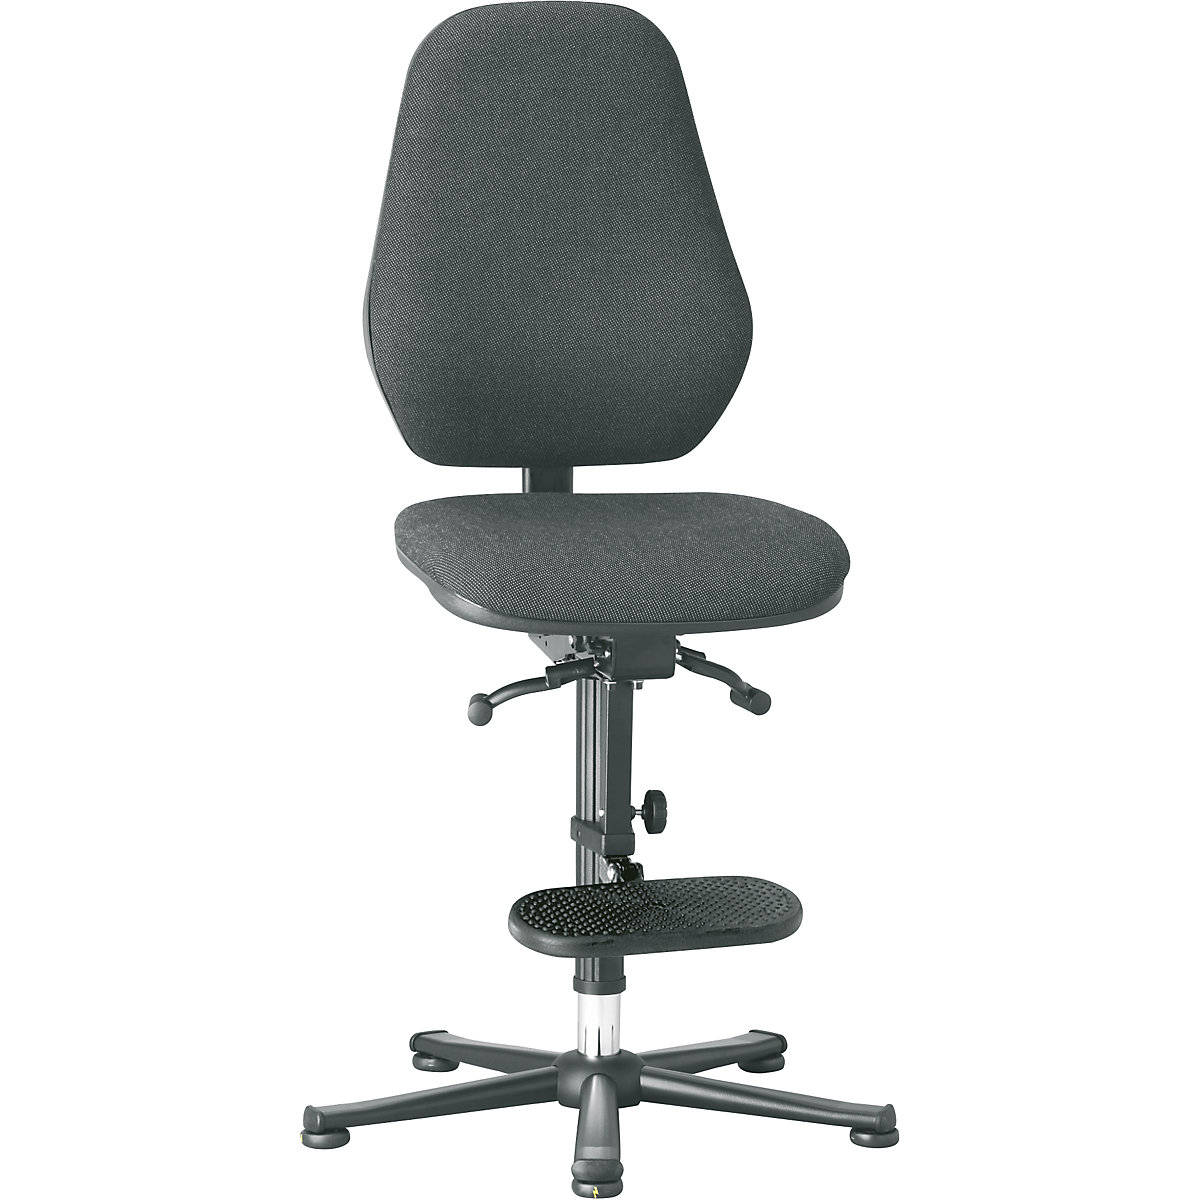 Industrial swivel chair – bimos, with ESD protection, with synchronous mechanism and weight adjustment, floor glides, step-up, black fabric covering-6